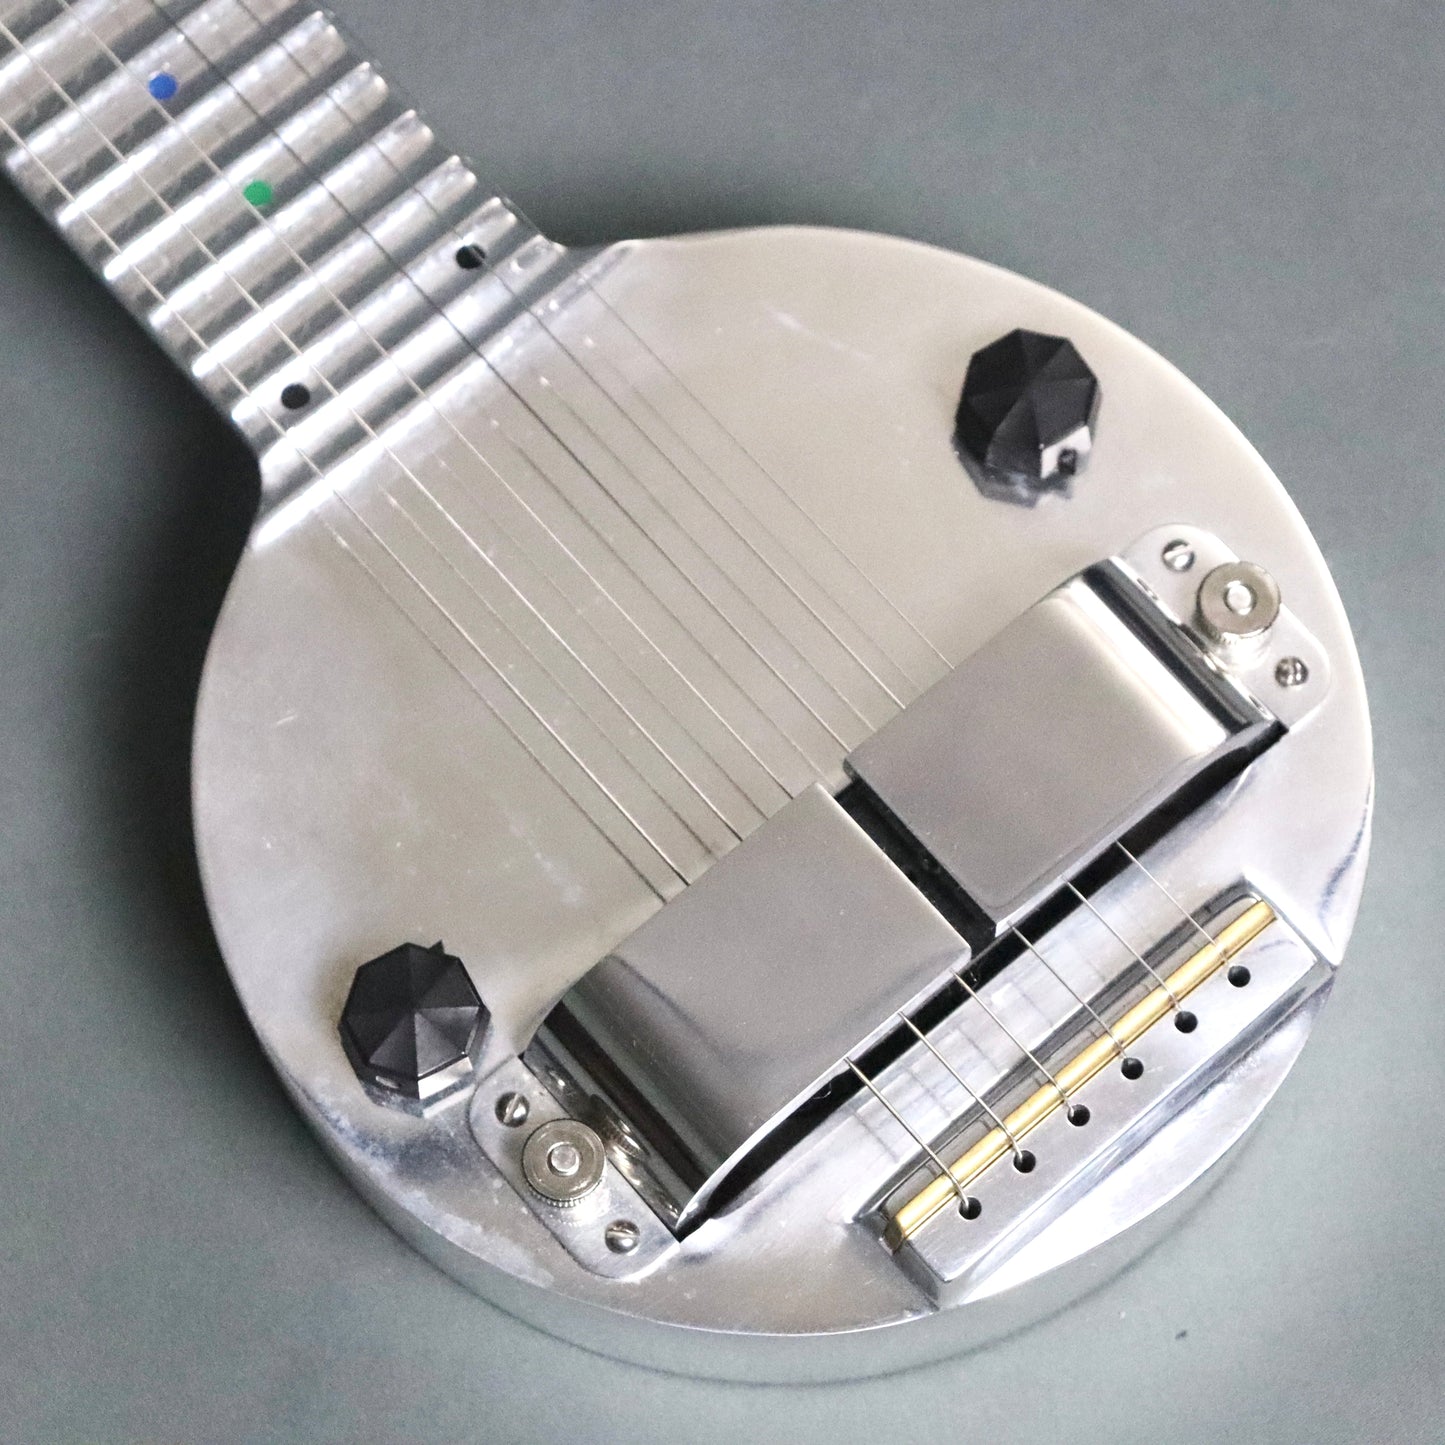 2019 Todd Clinesmith A-25 Fry Pan Lap Steel Guitar Frying Pan Electro Lapsteel